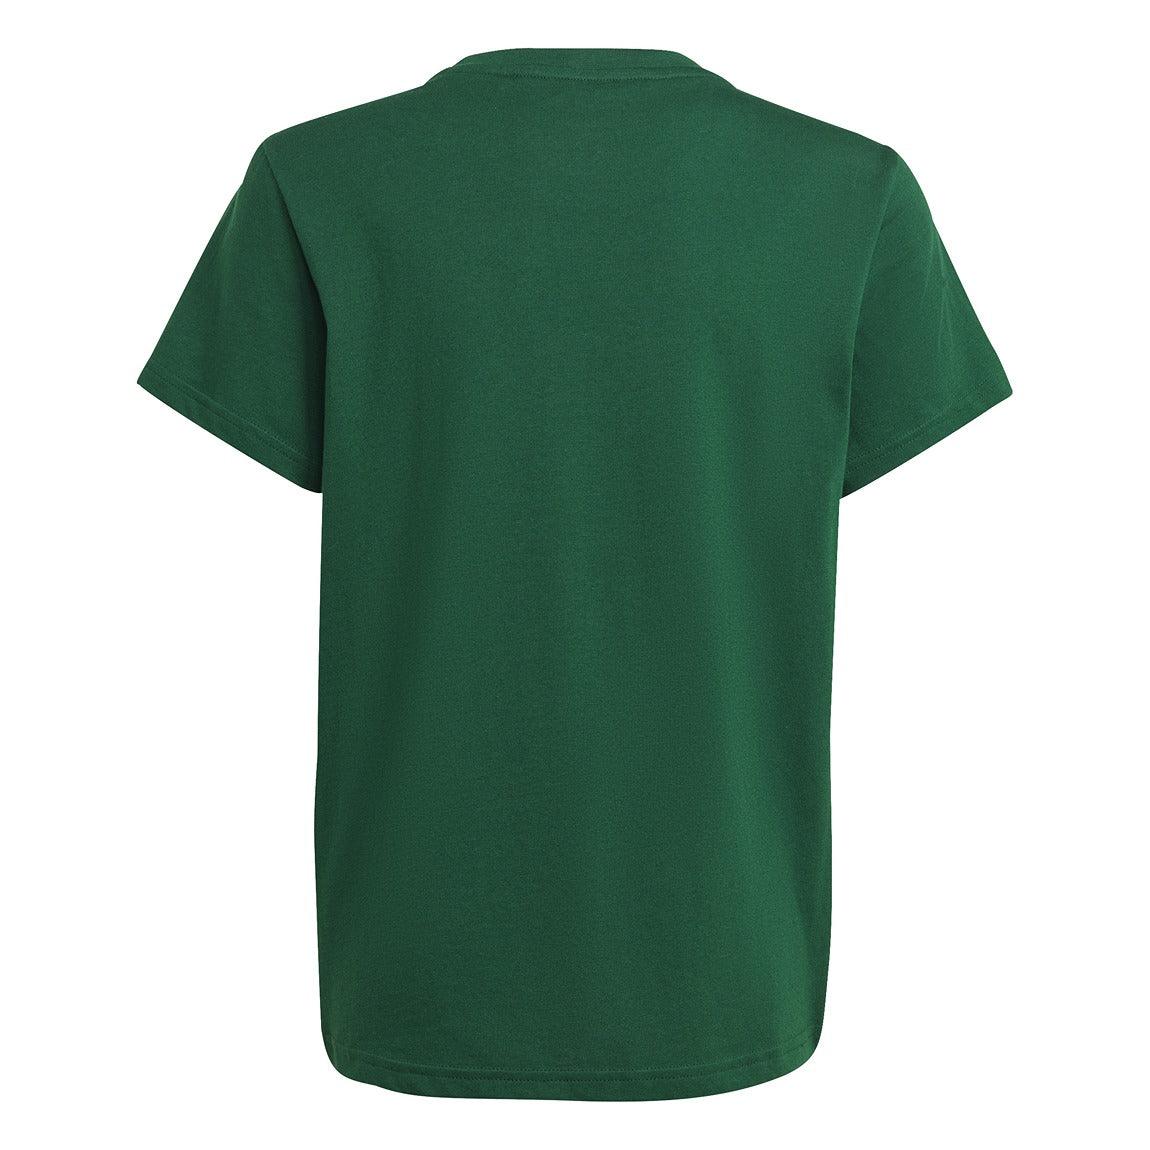 Trefoil T-Shirt - Youth - Sports Excellence